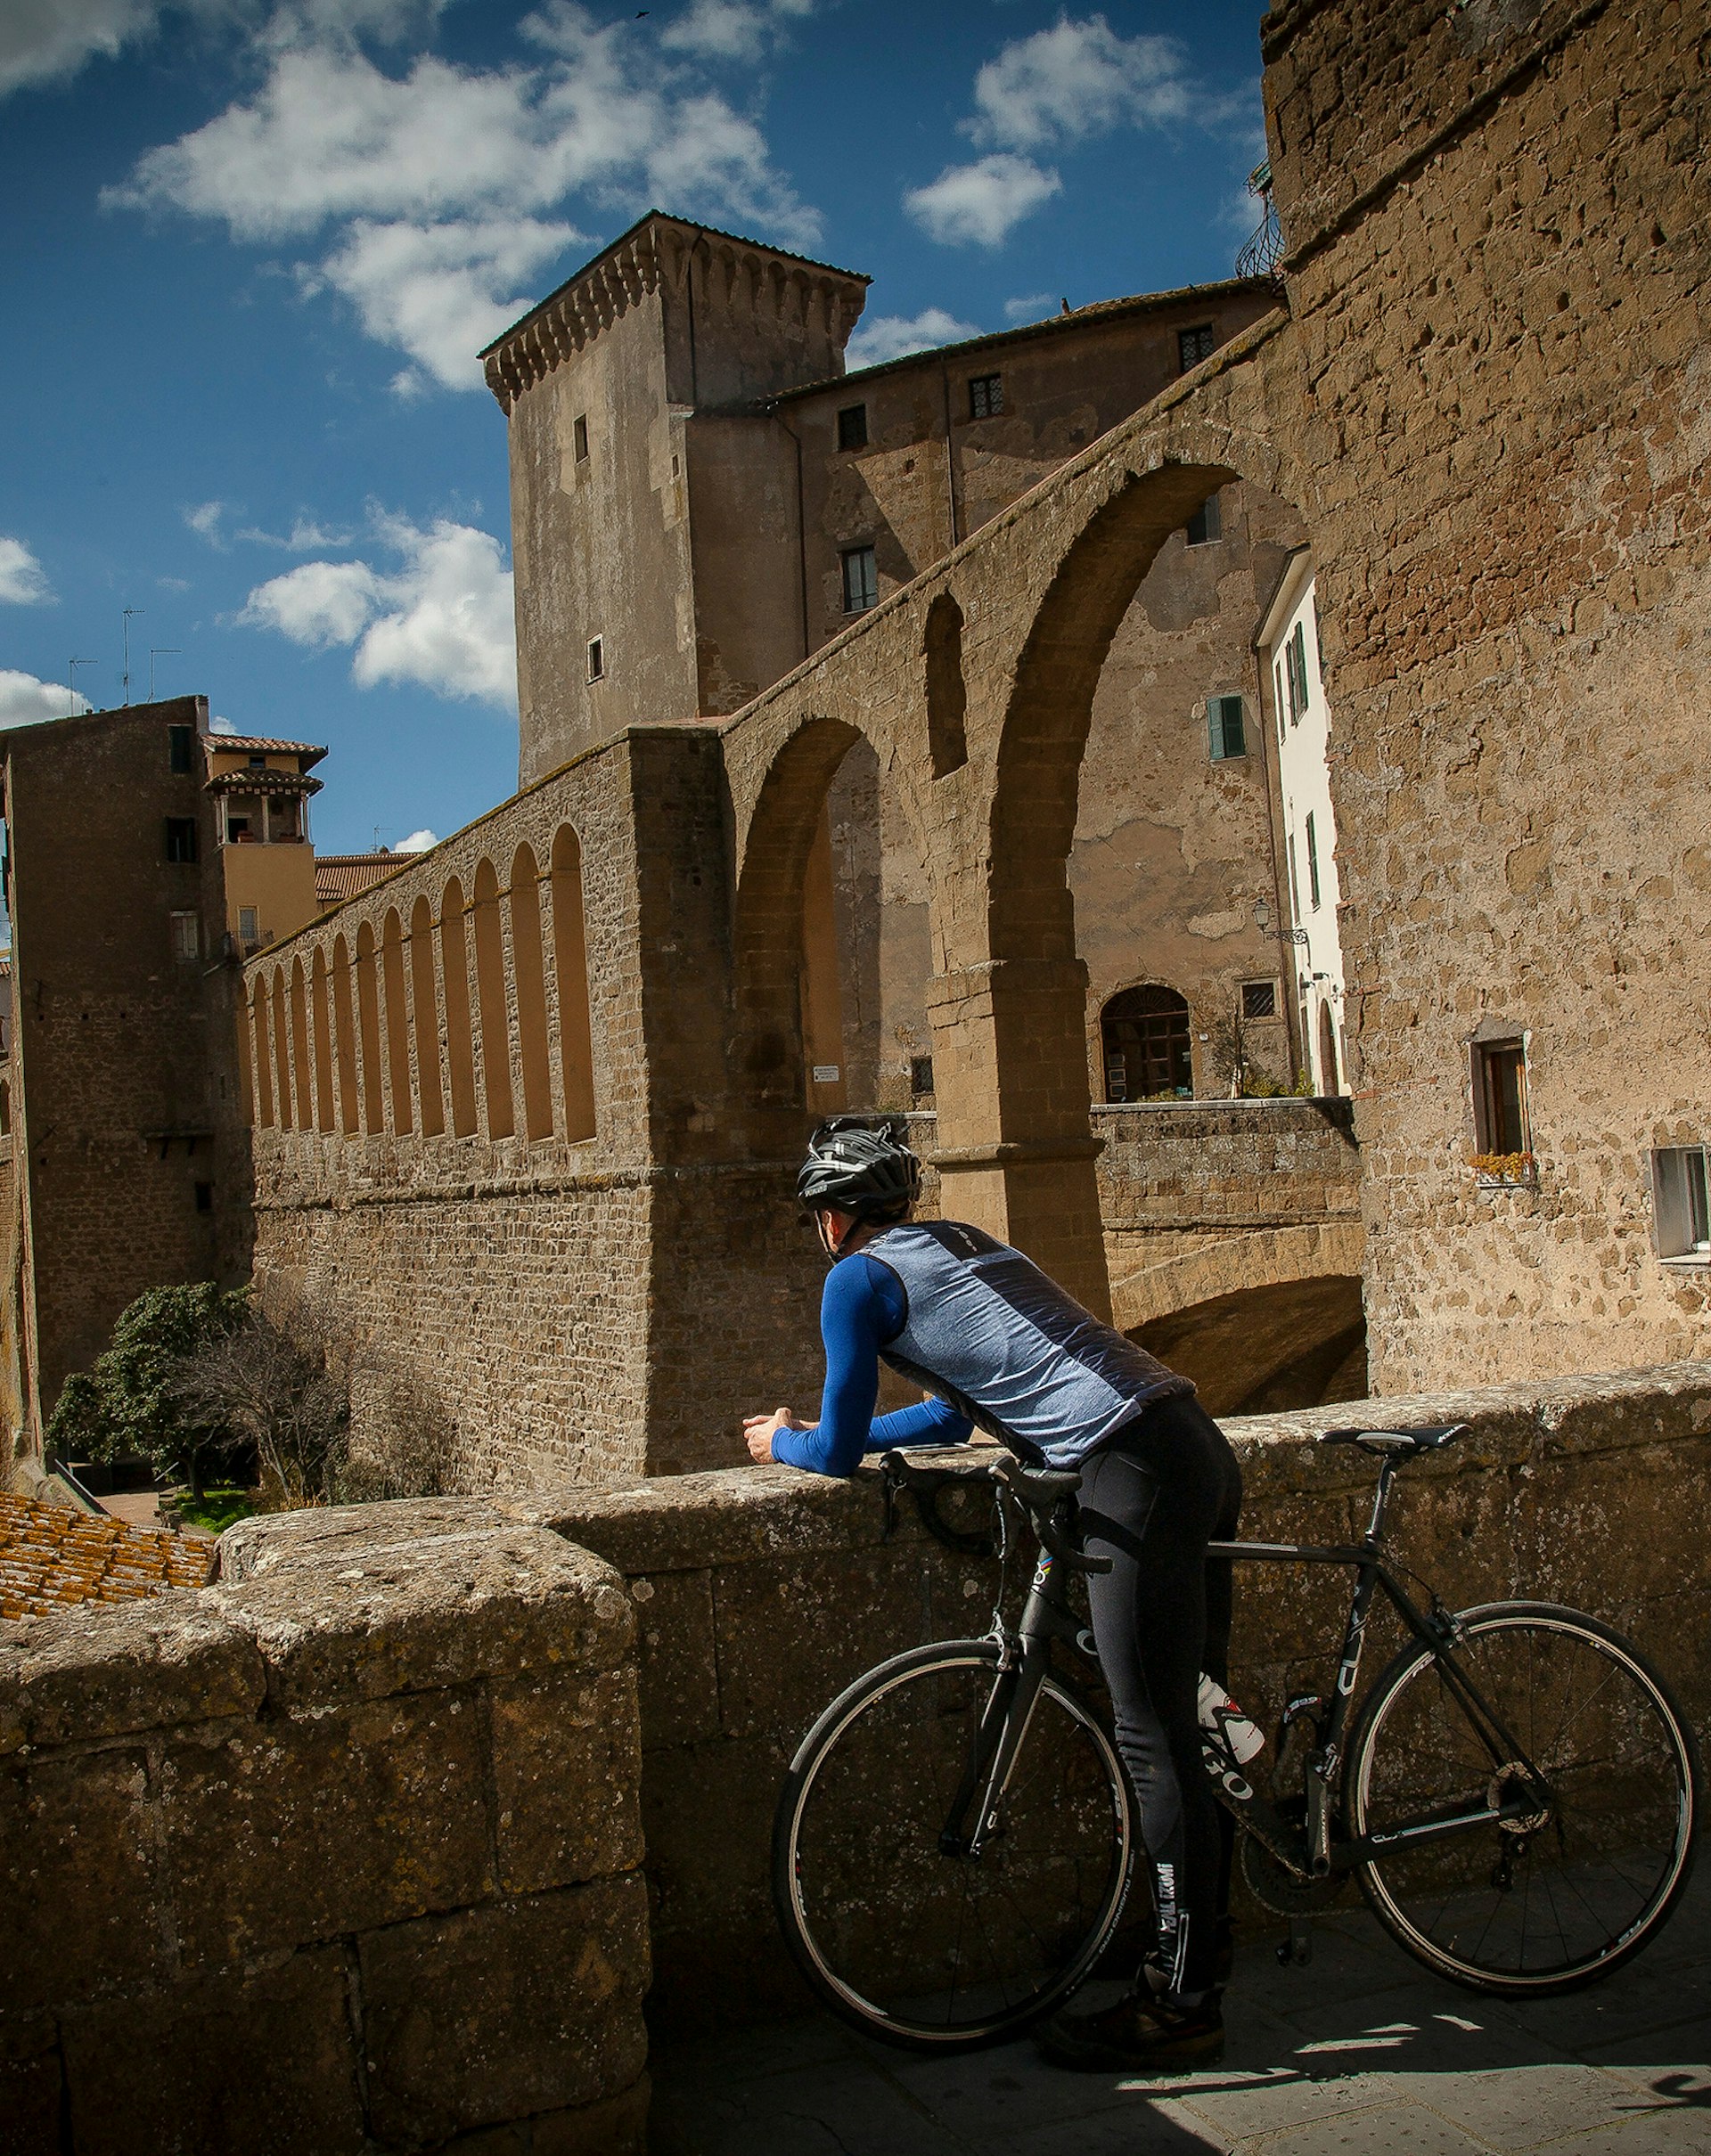 A cyclist leans over his handlebars onto a low wall and gazes out over a towering aqueduct with beautiful arches in the hilltop village of Pitigliano © Ciclica & Foto Mario Llorca.com